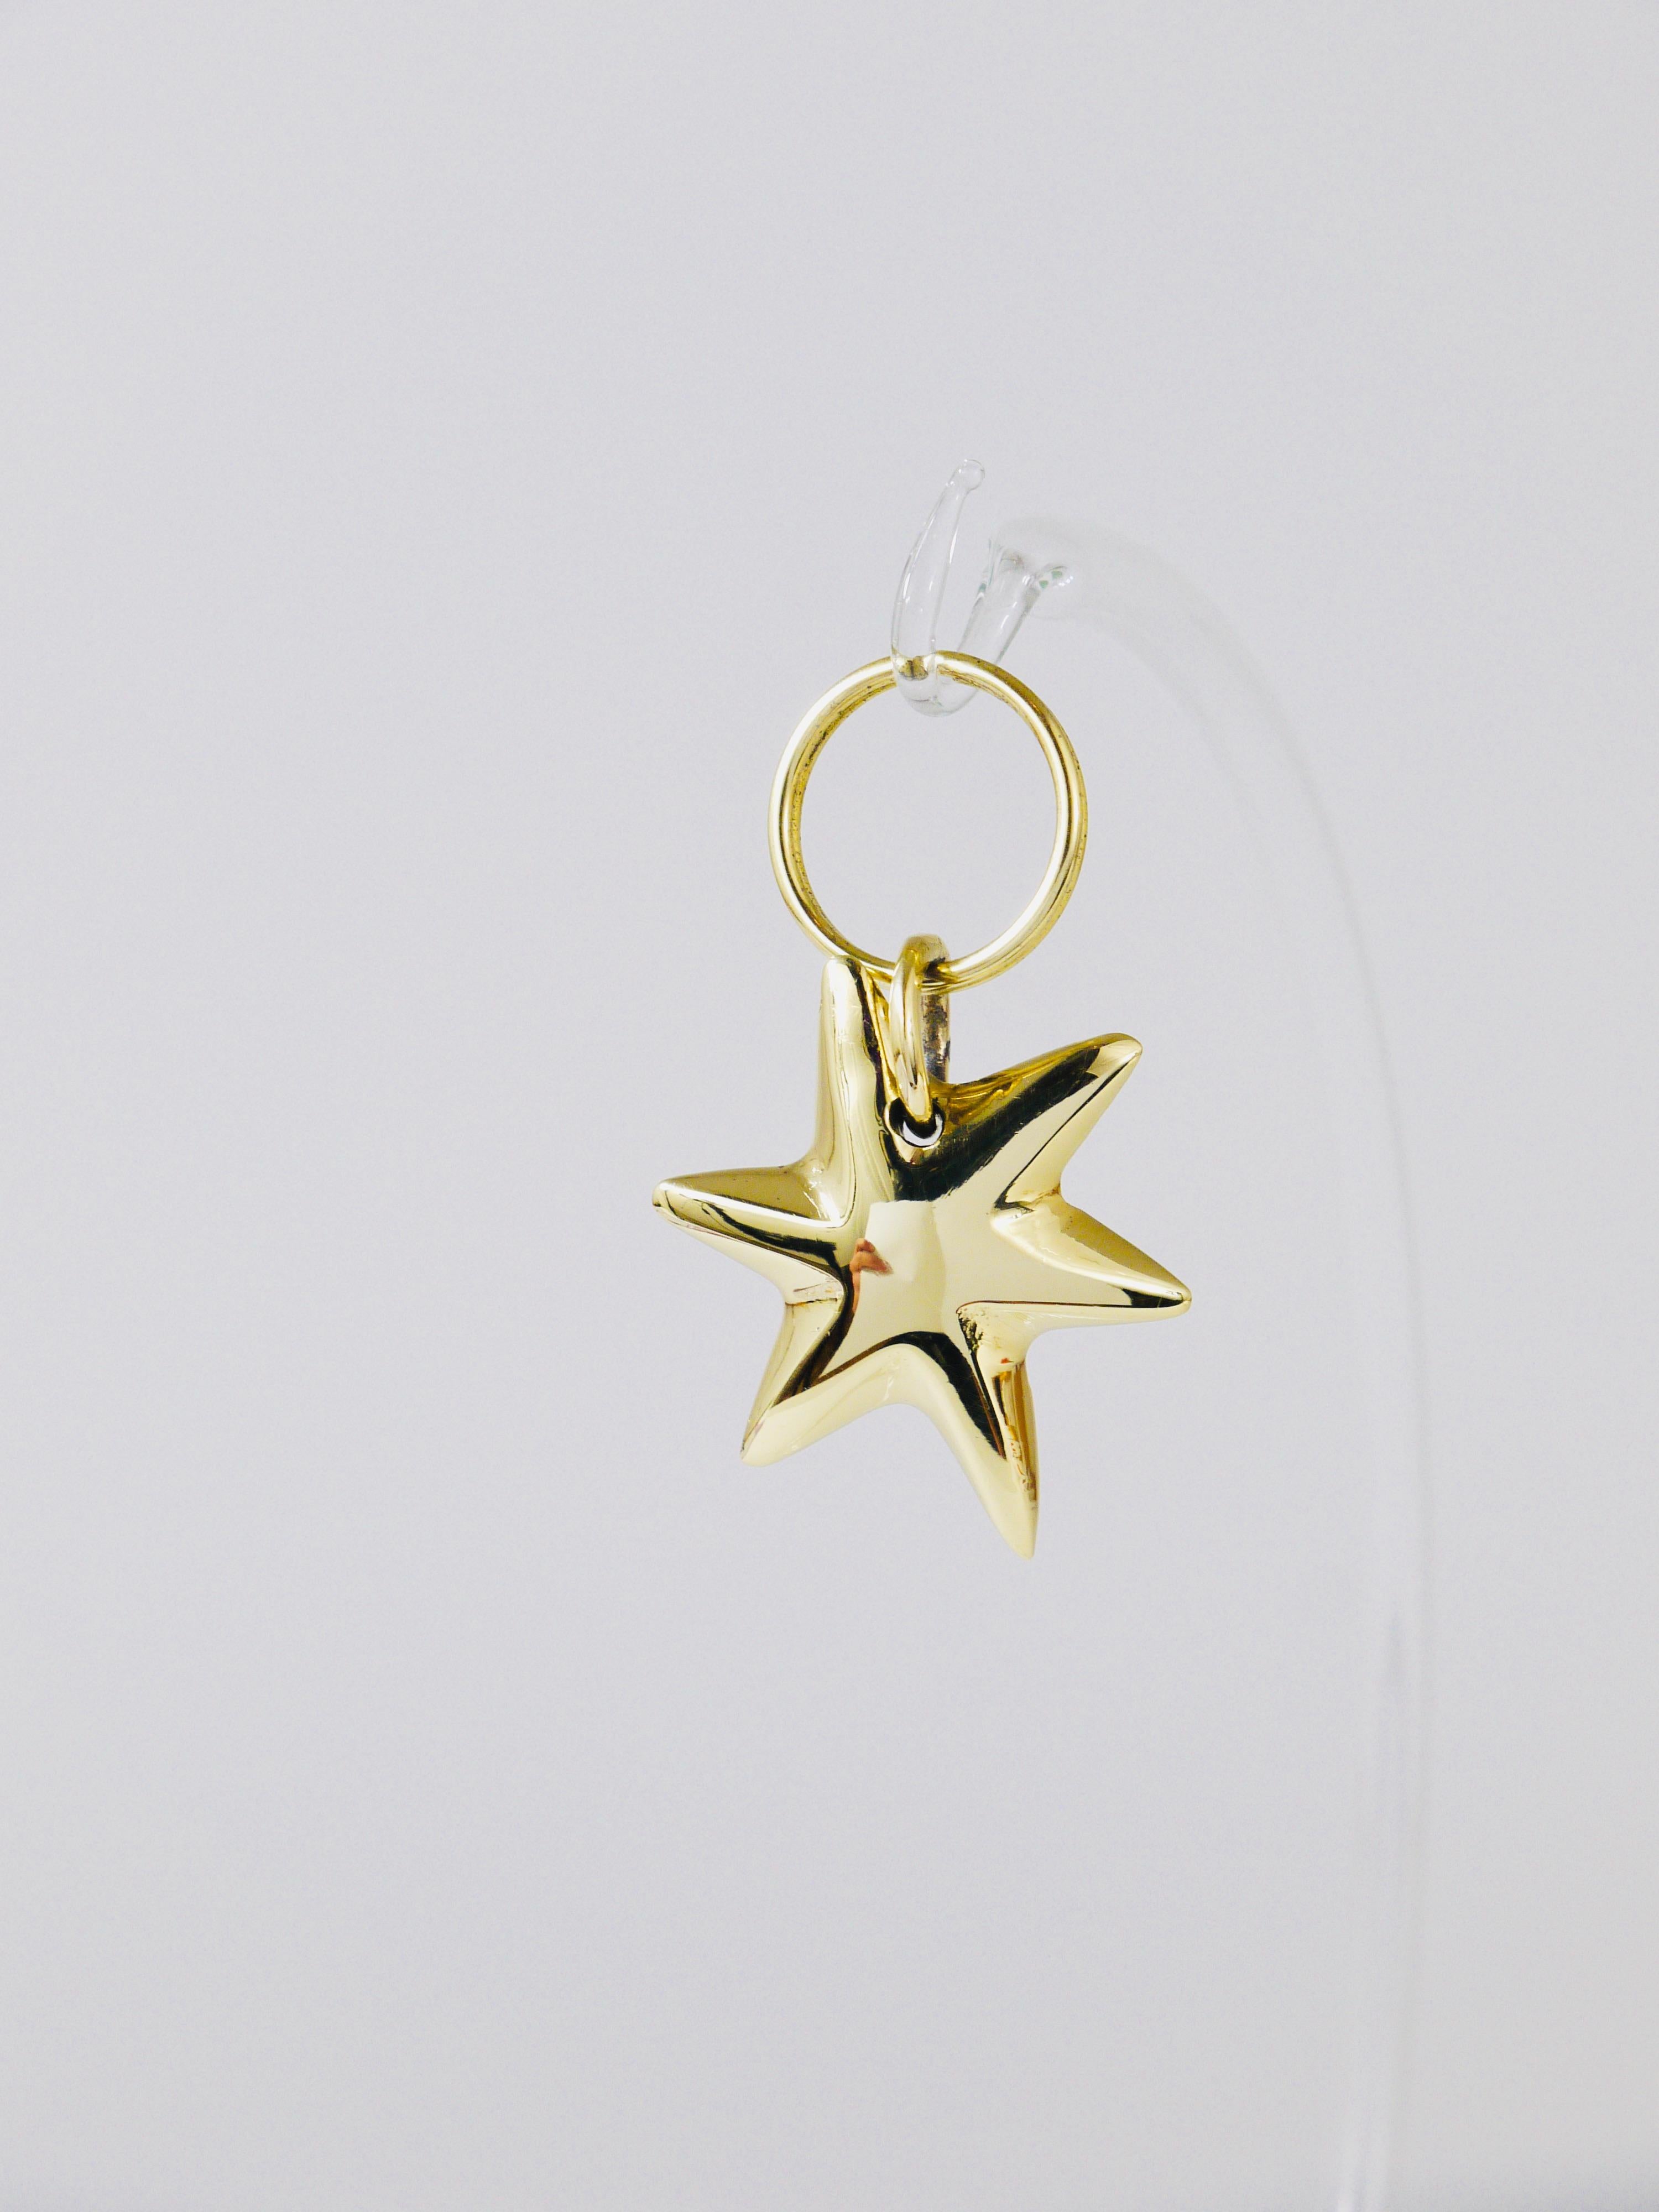 Polished Carl Auböck Midcentury Brass Star Sea Star Starfish Key Ring Chain Holder For Sale